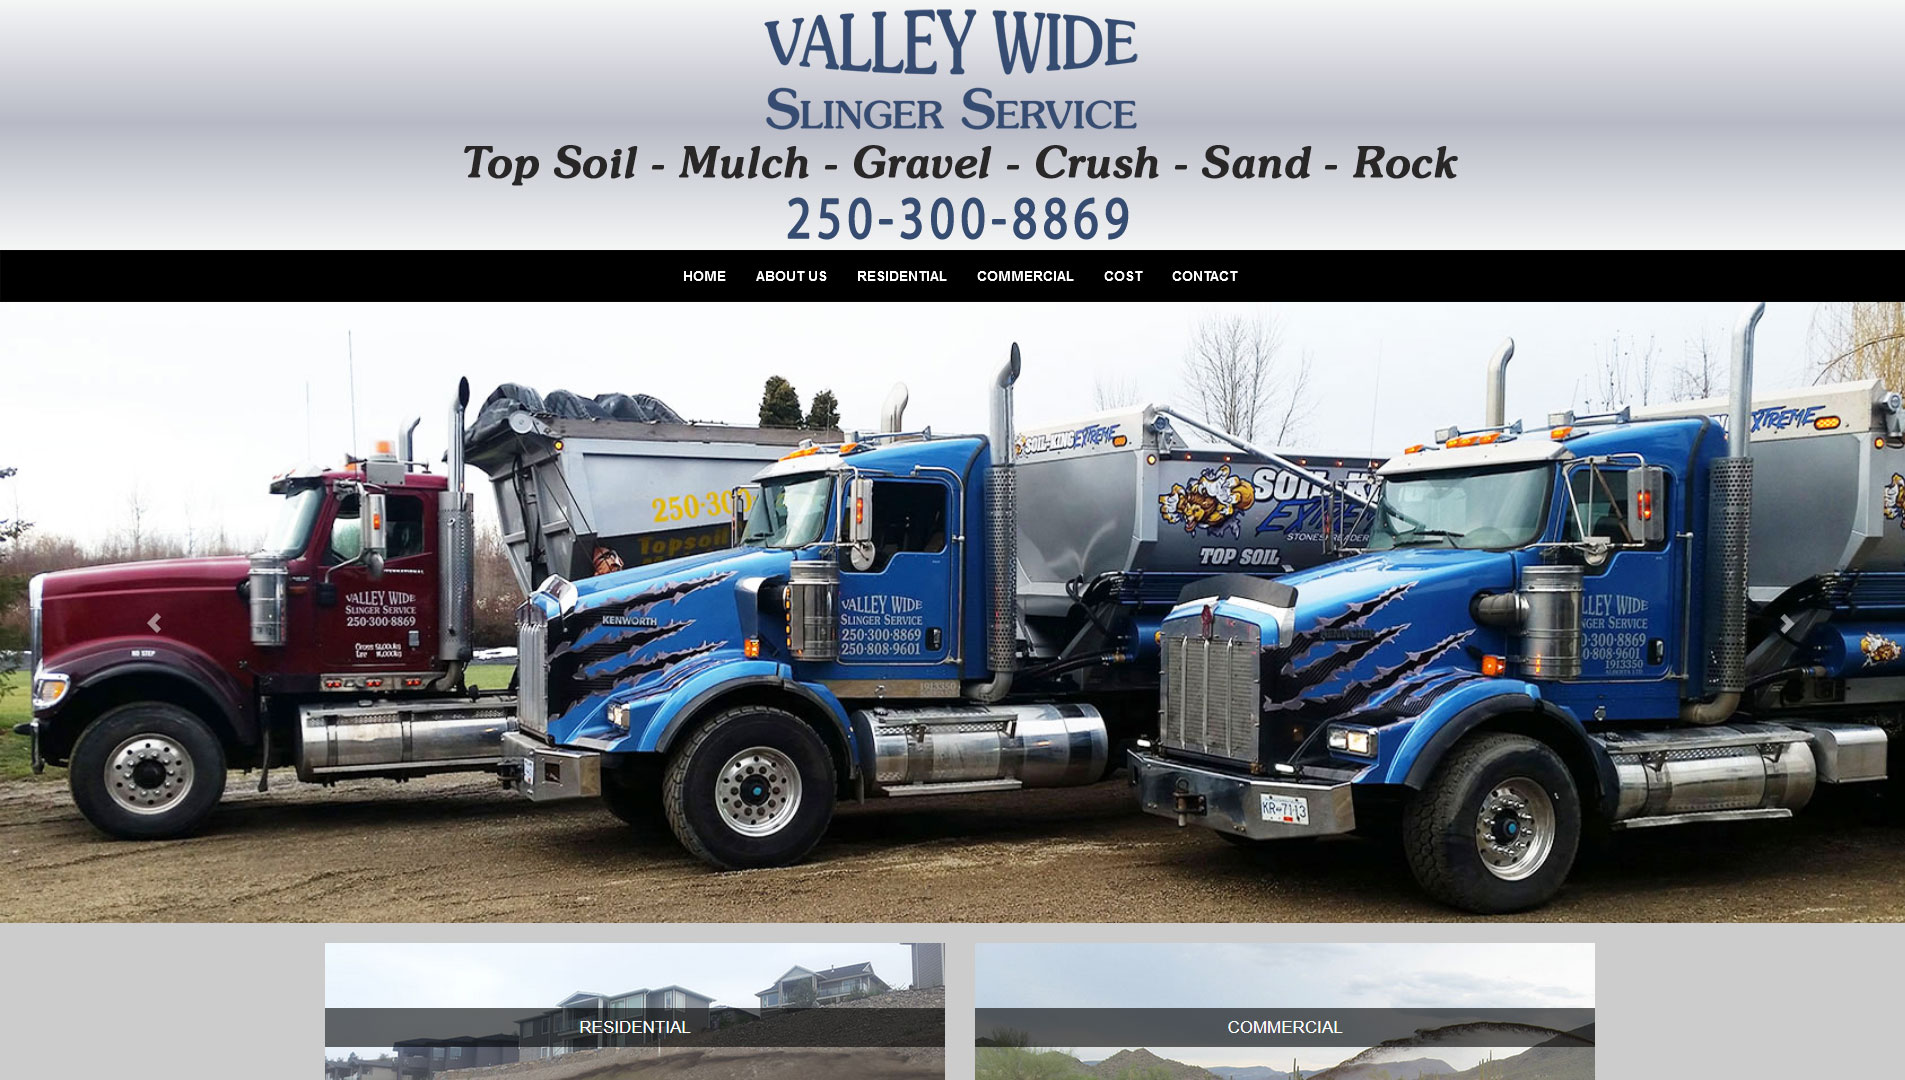 Valley Wide Slinger Service, putting top soil, mulch, gravel, crush, sand and rock exactly where you need it!